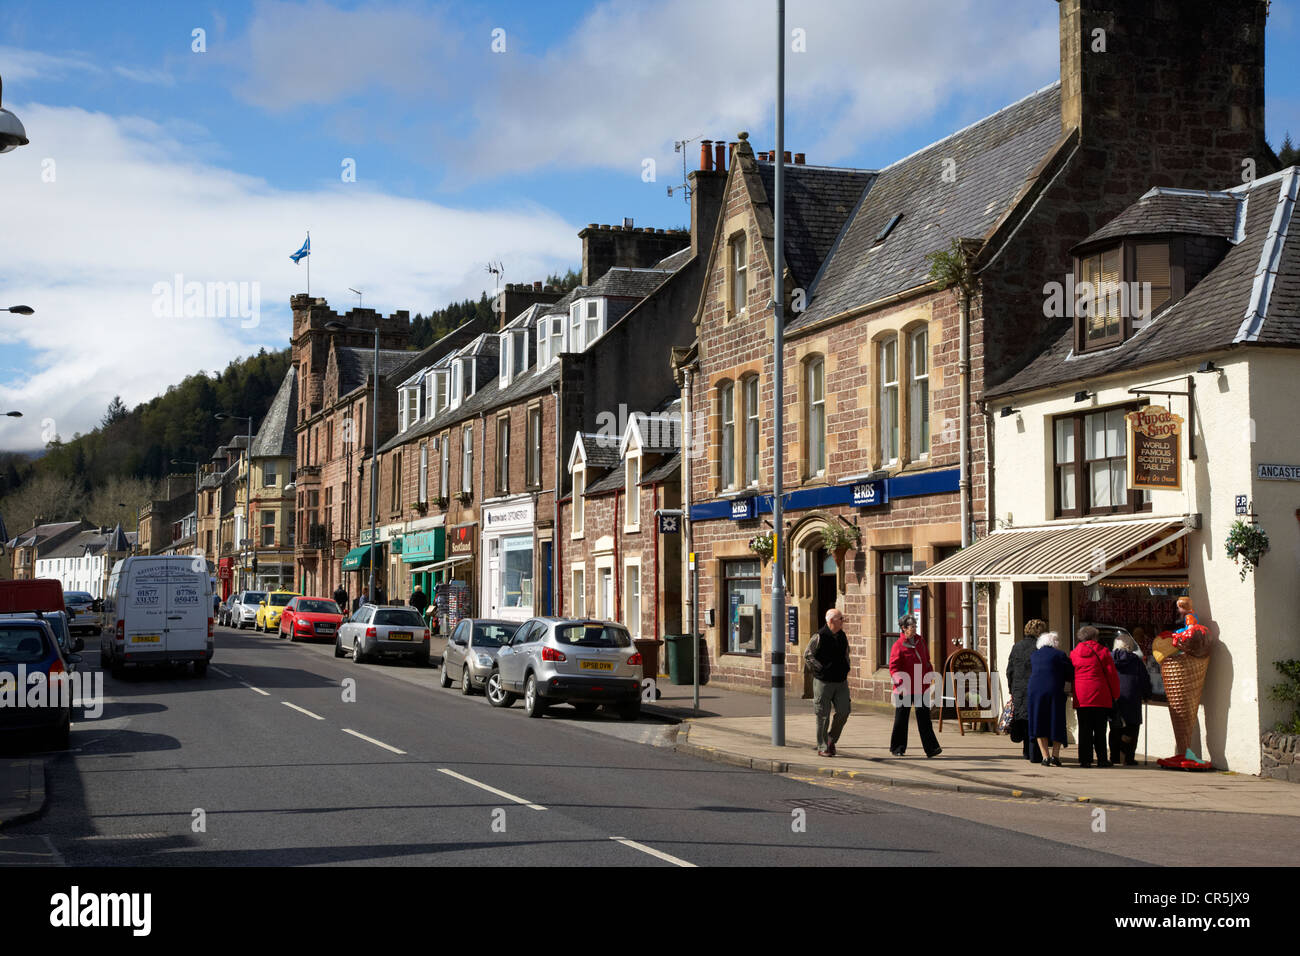 main road through the picturesque small town of Callander scotland uk Stock Photo